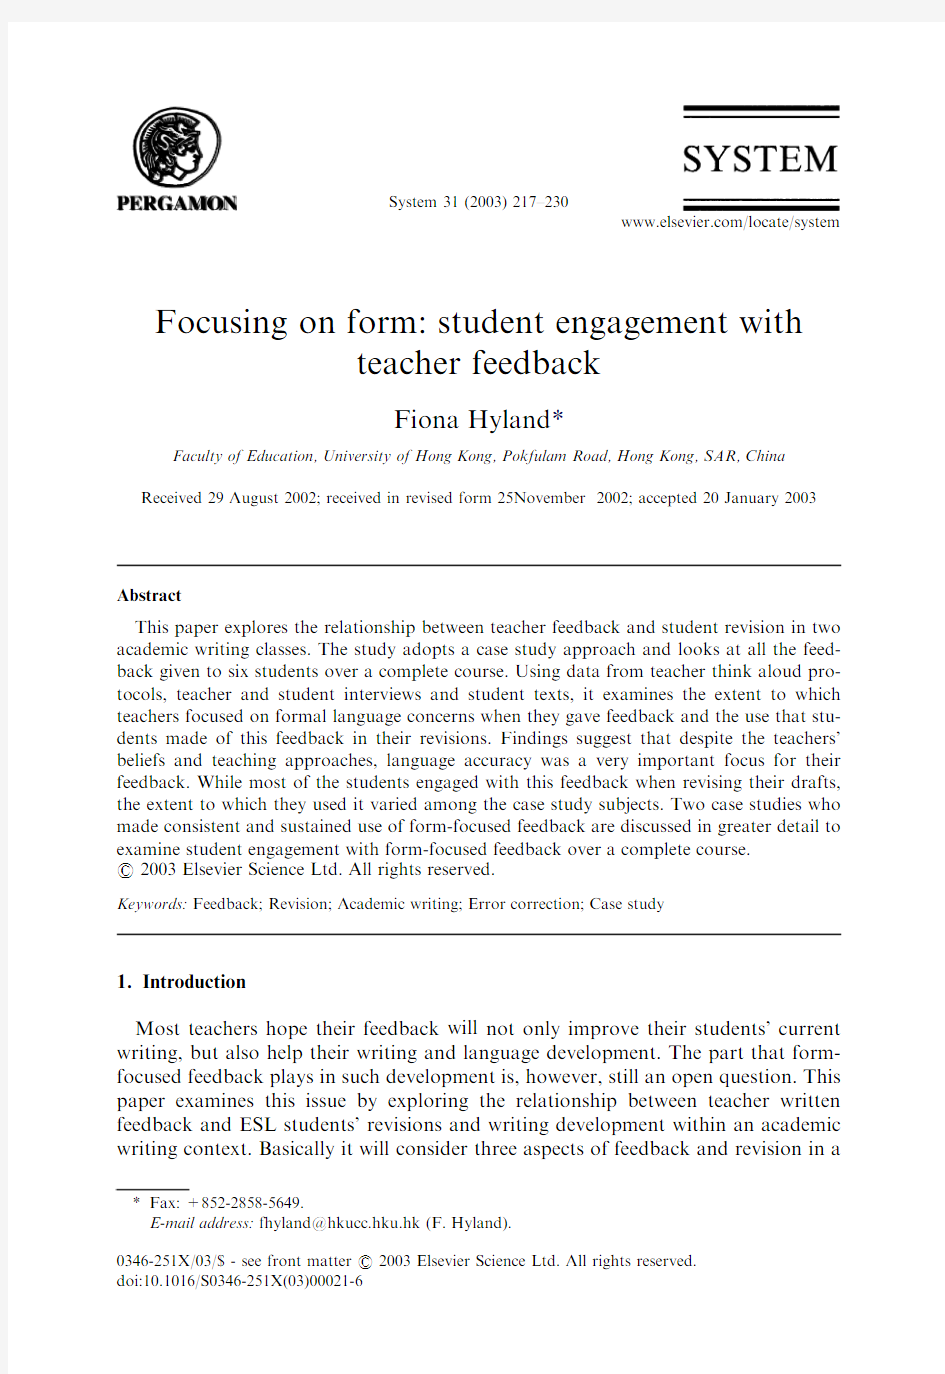 focus on form- student engagement with teacher feedback